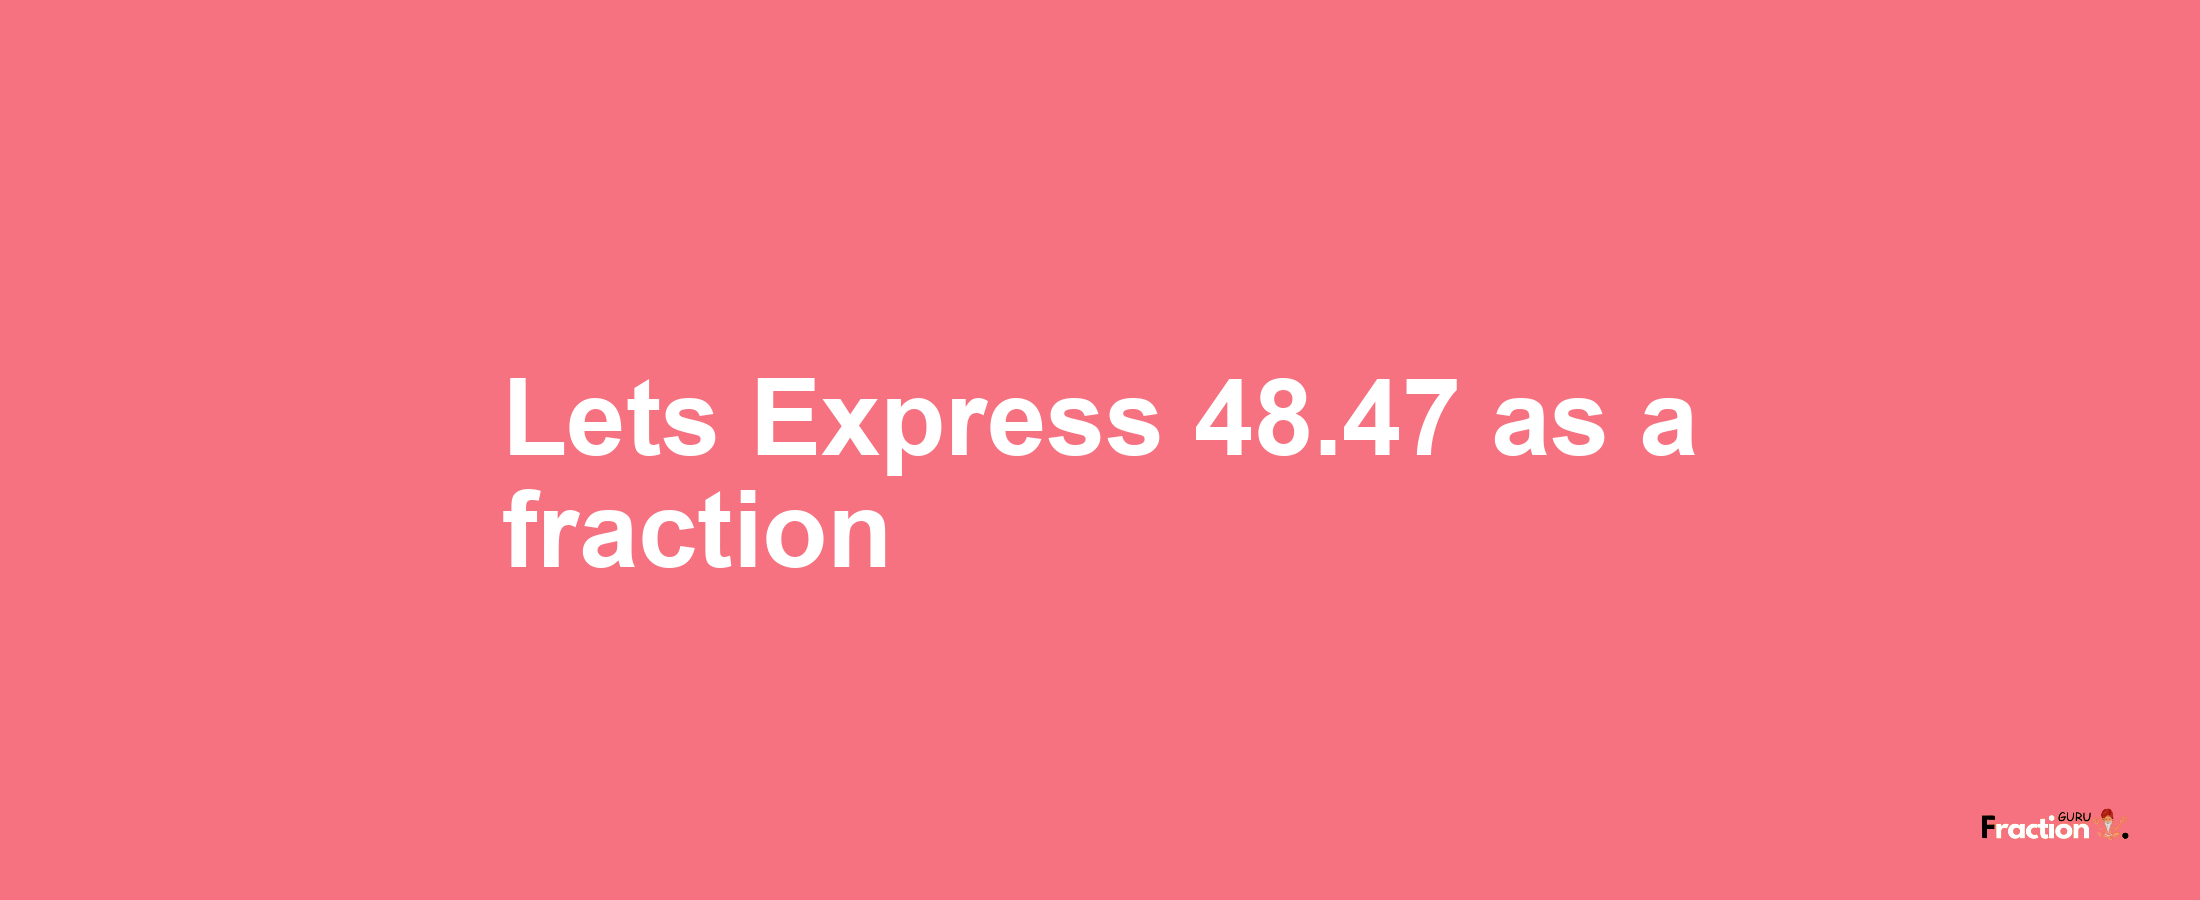 Lets Express 48.47 as afraction